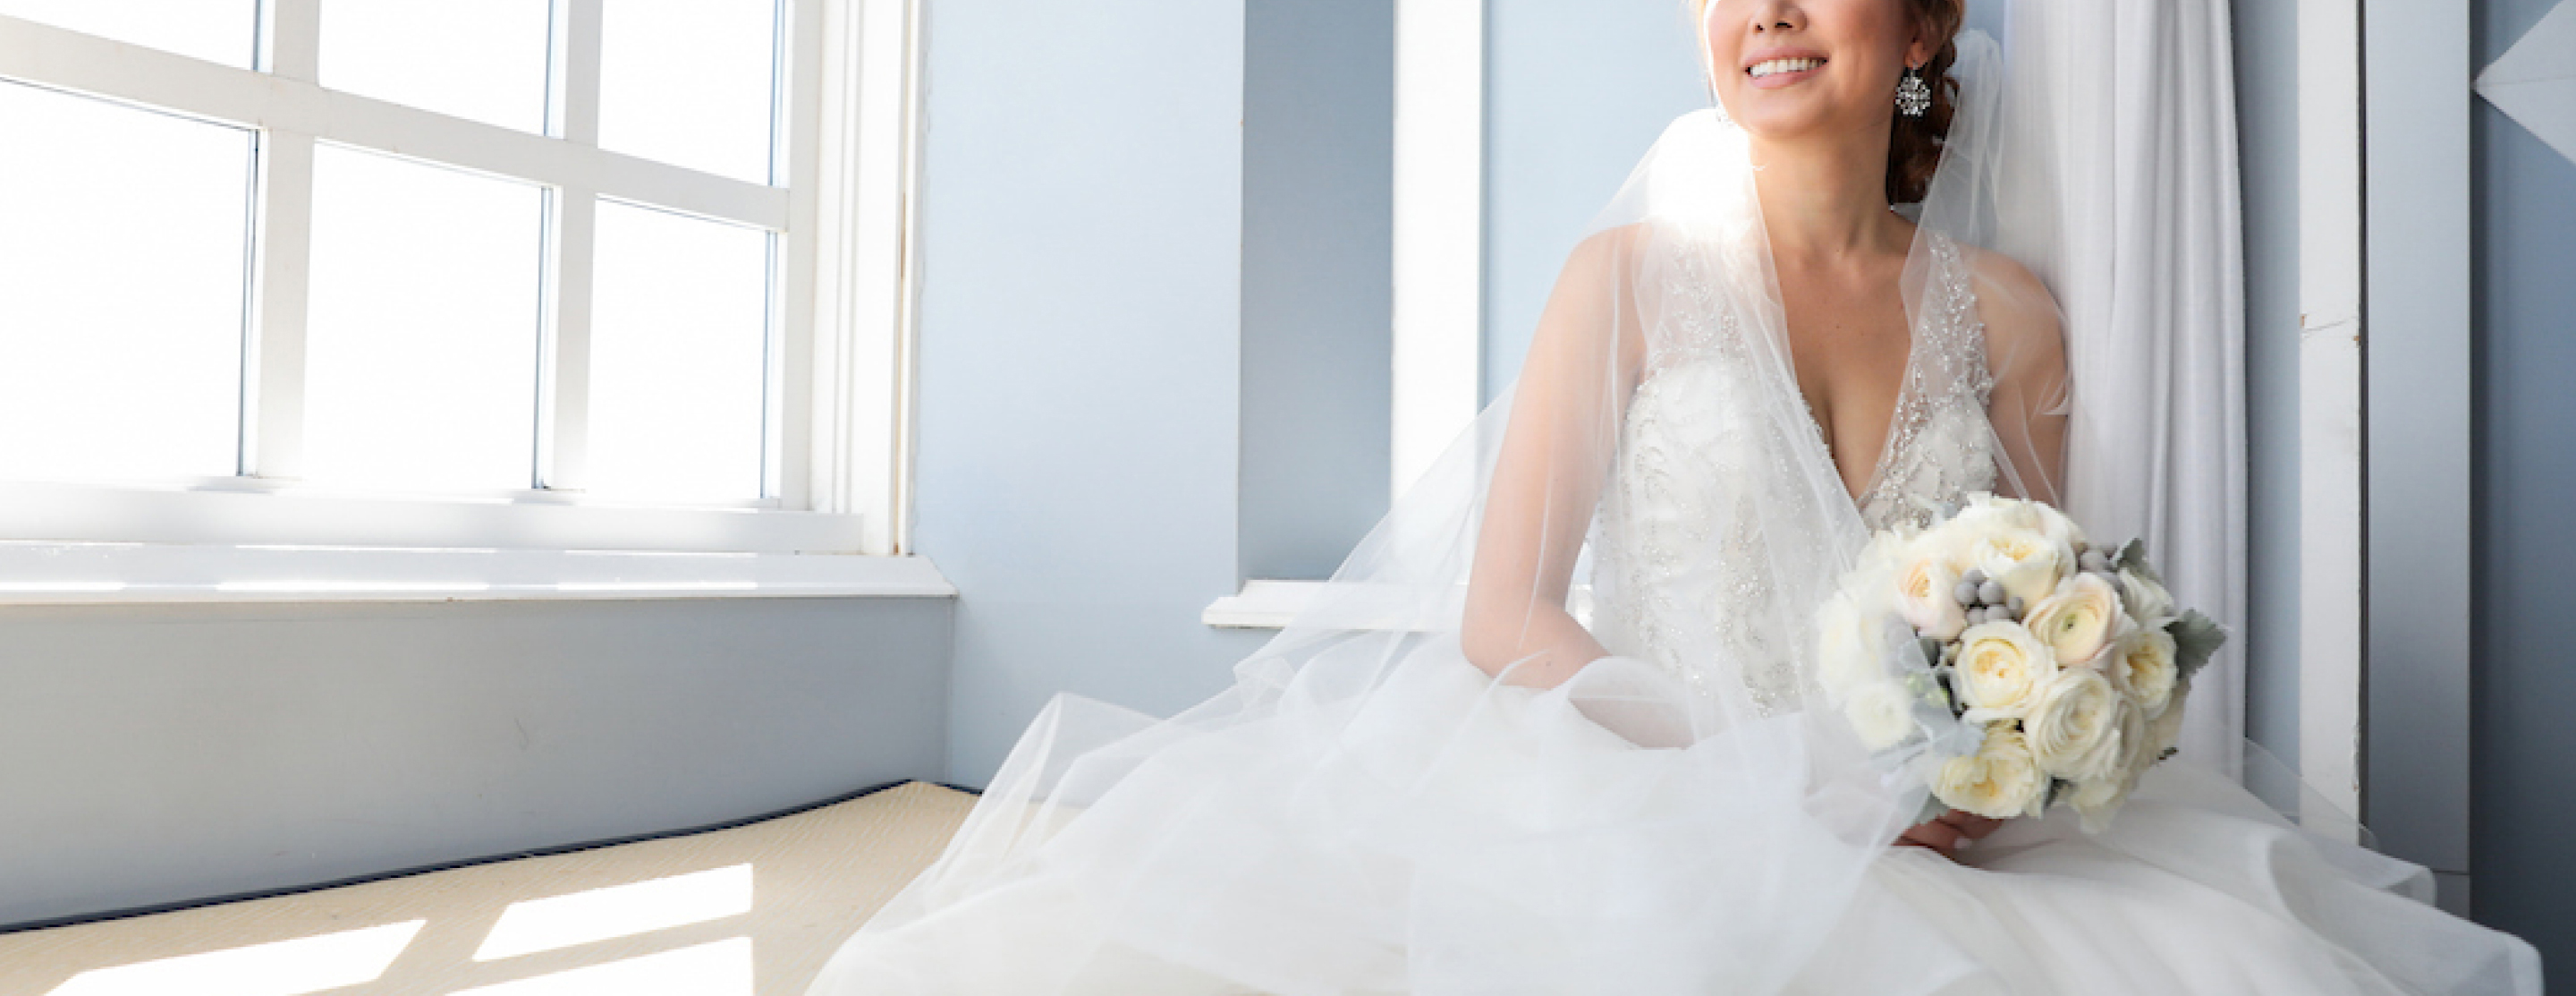 Learn how to sell your wedding dress